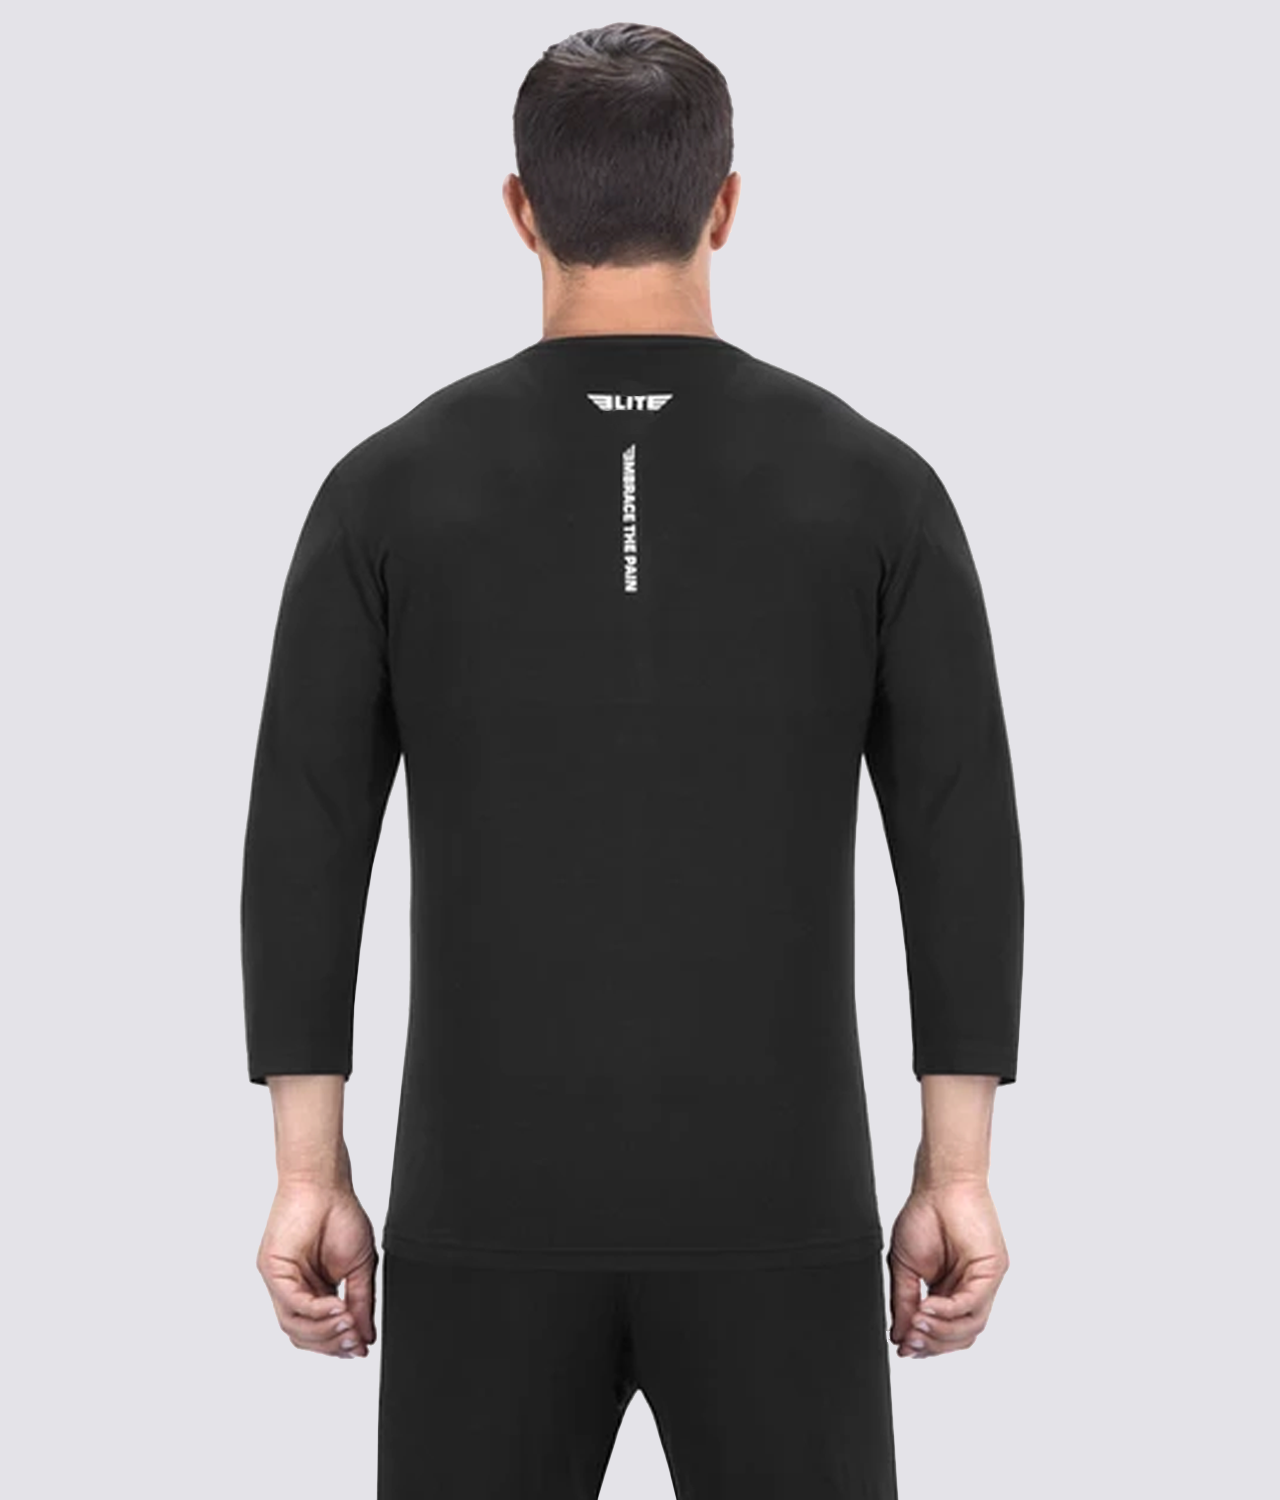 Adults' Black Athletic Recovery Wear